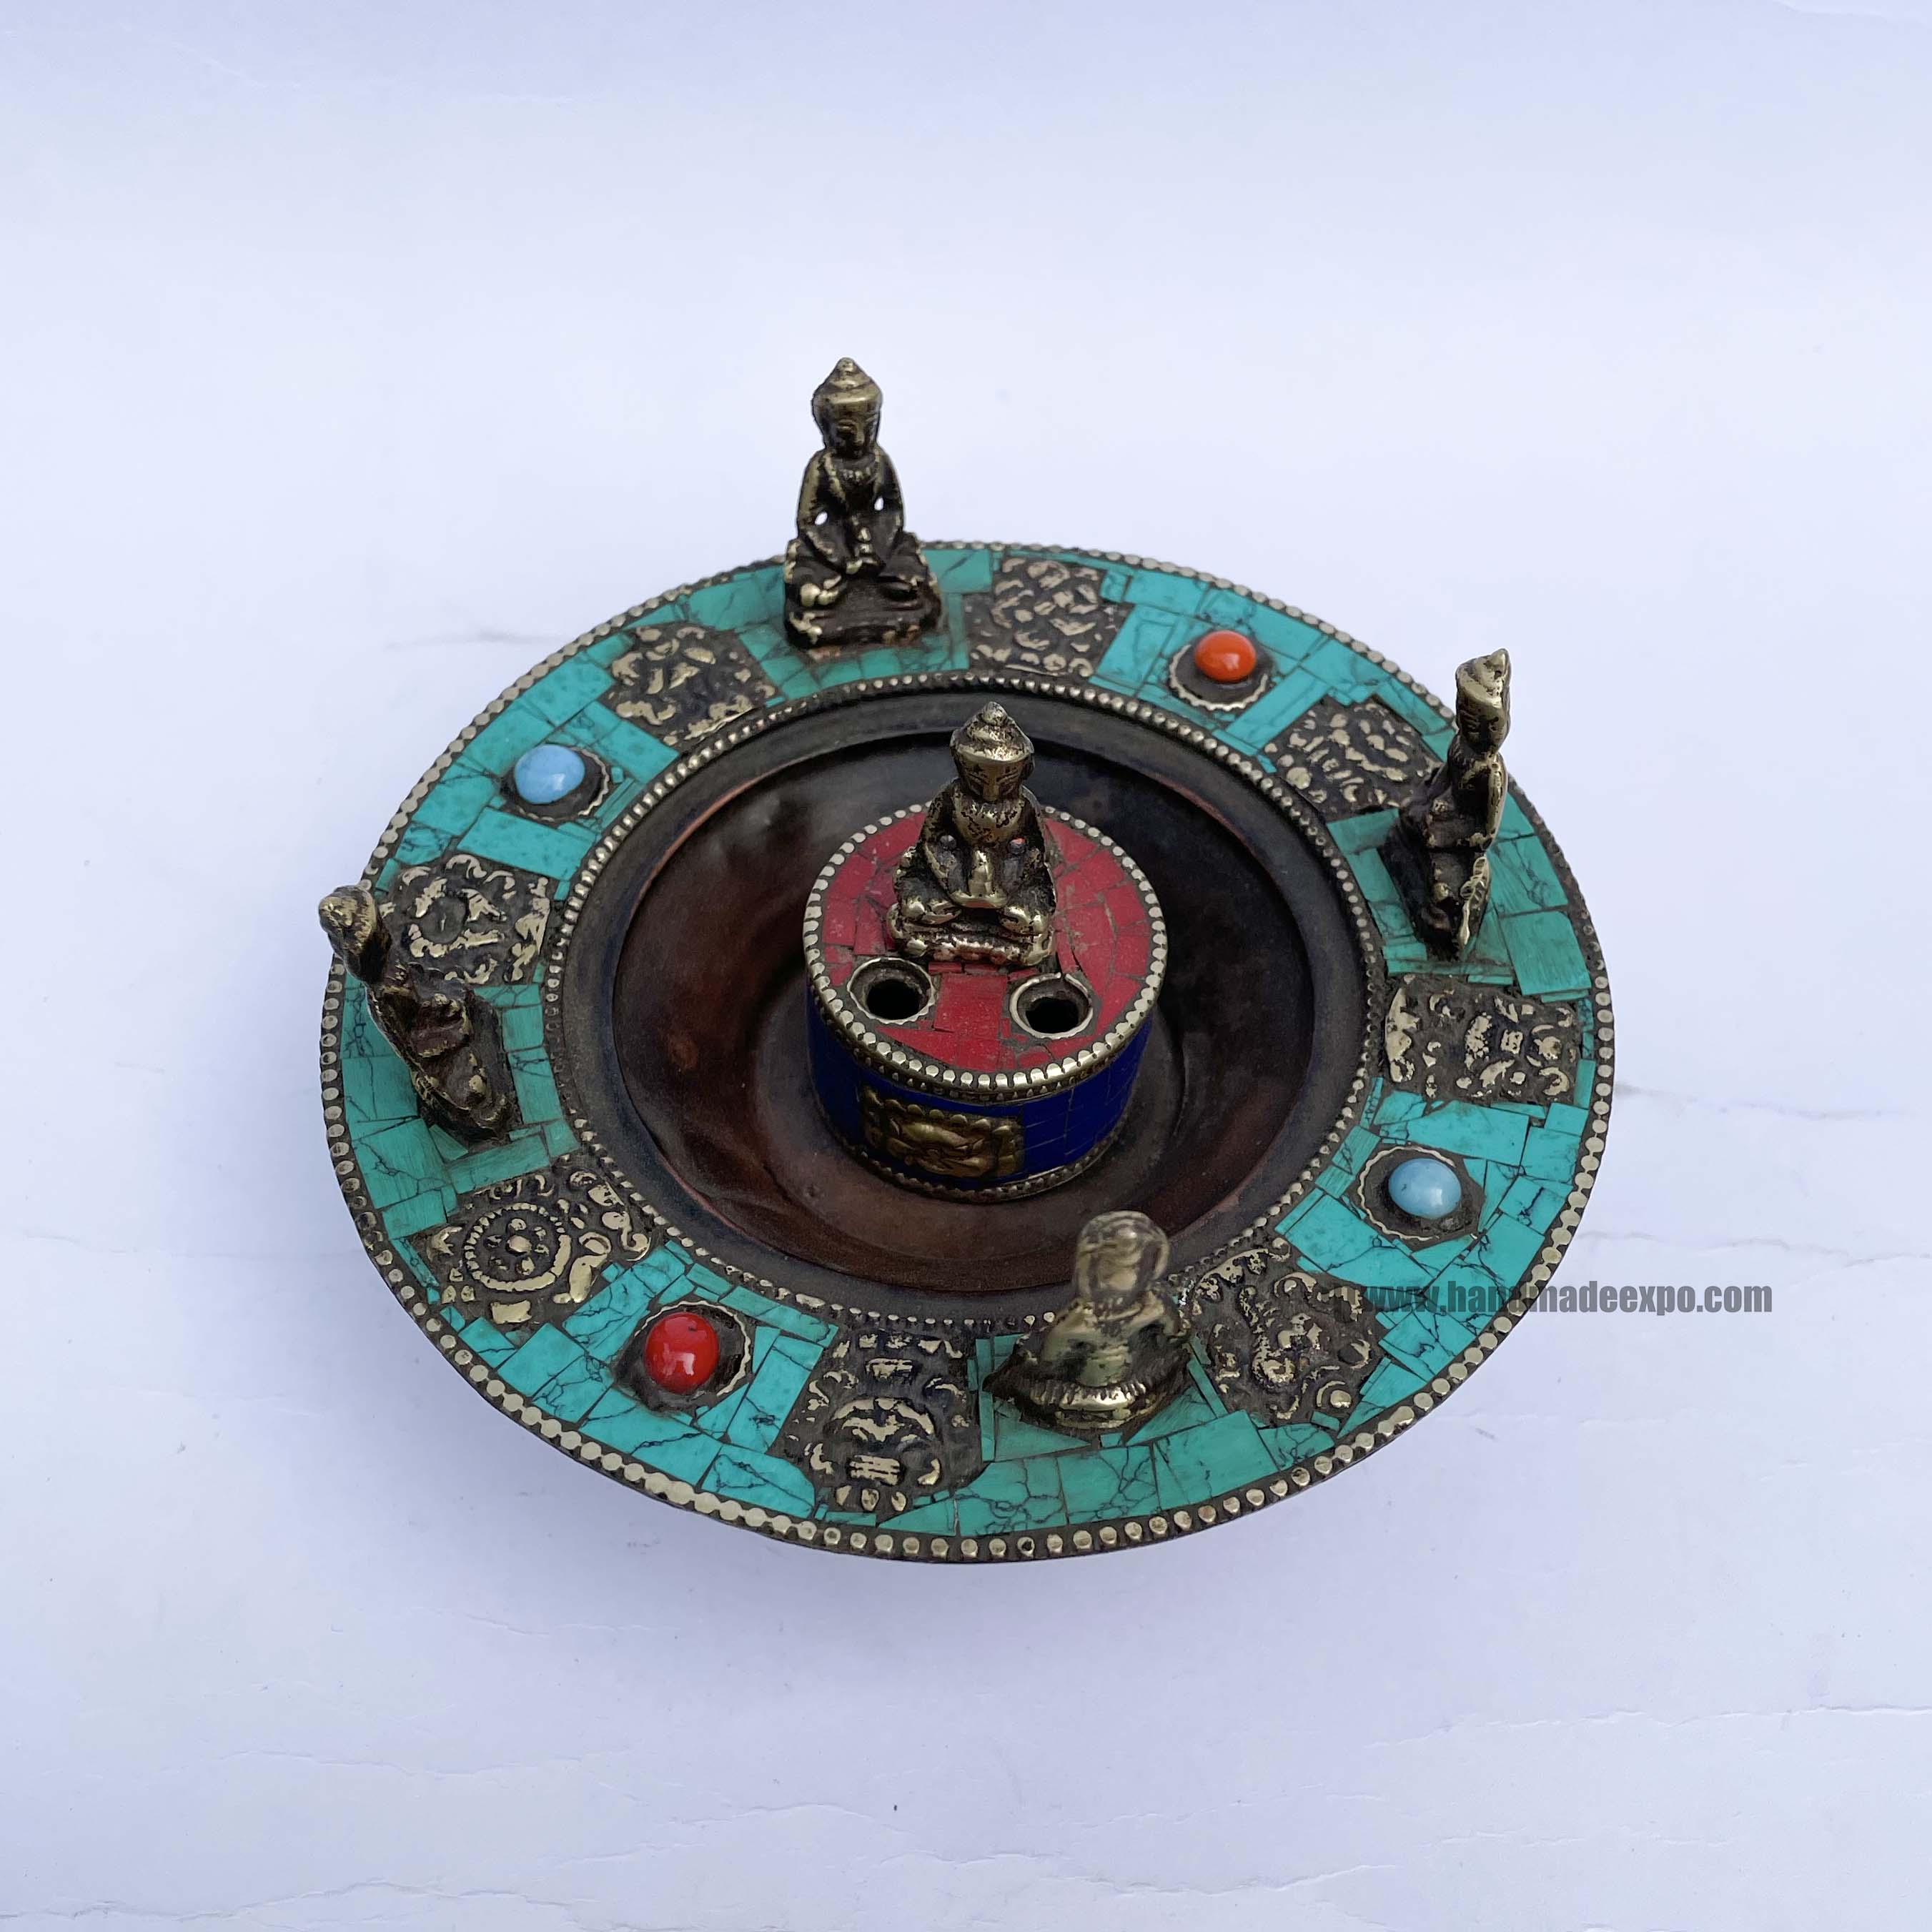 Hand Beaten Metal Incense Burner tourquise With Stone Setting